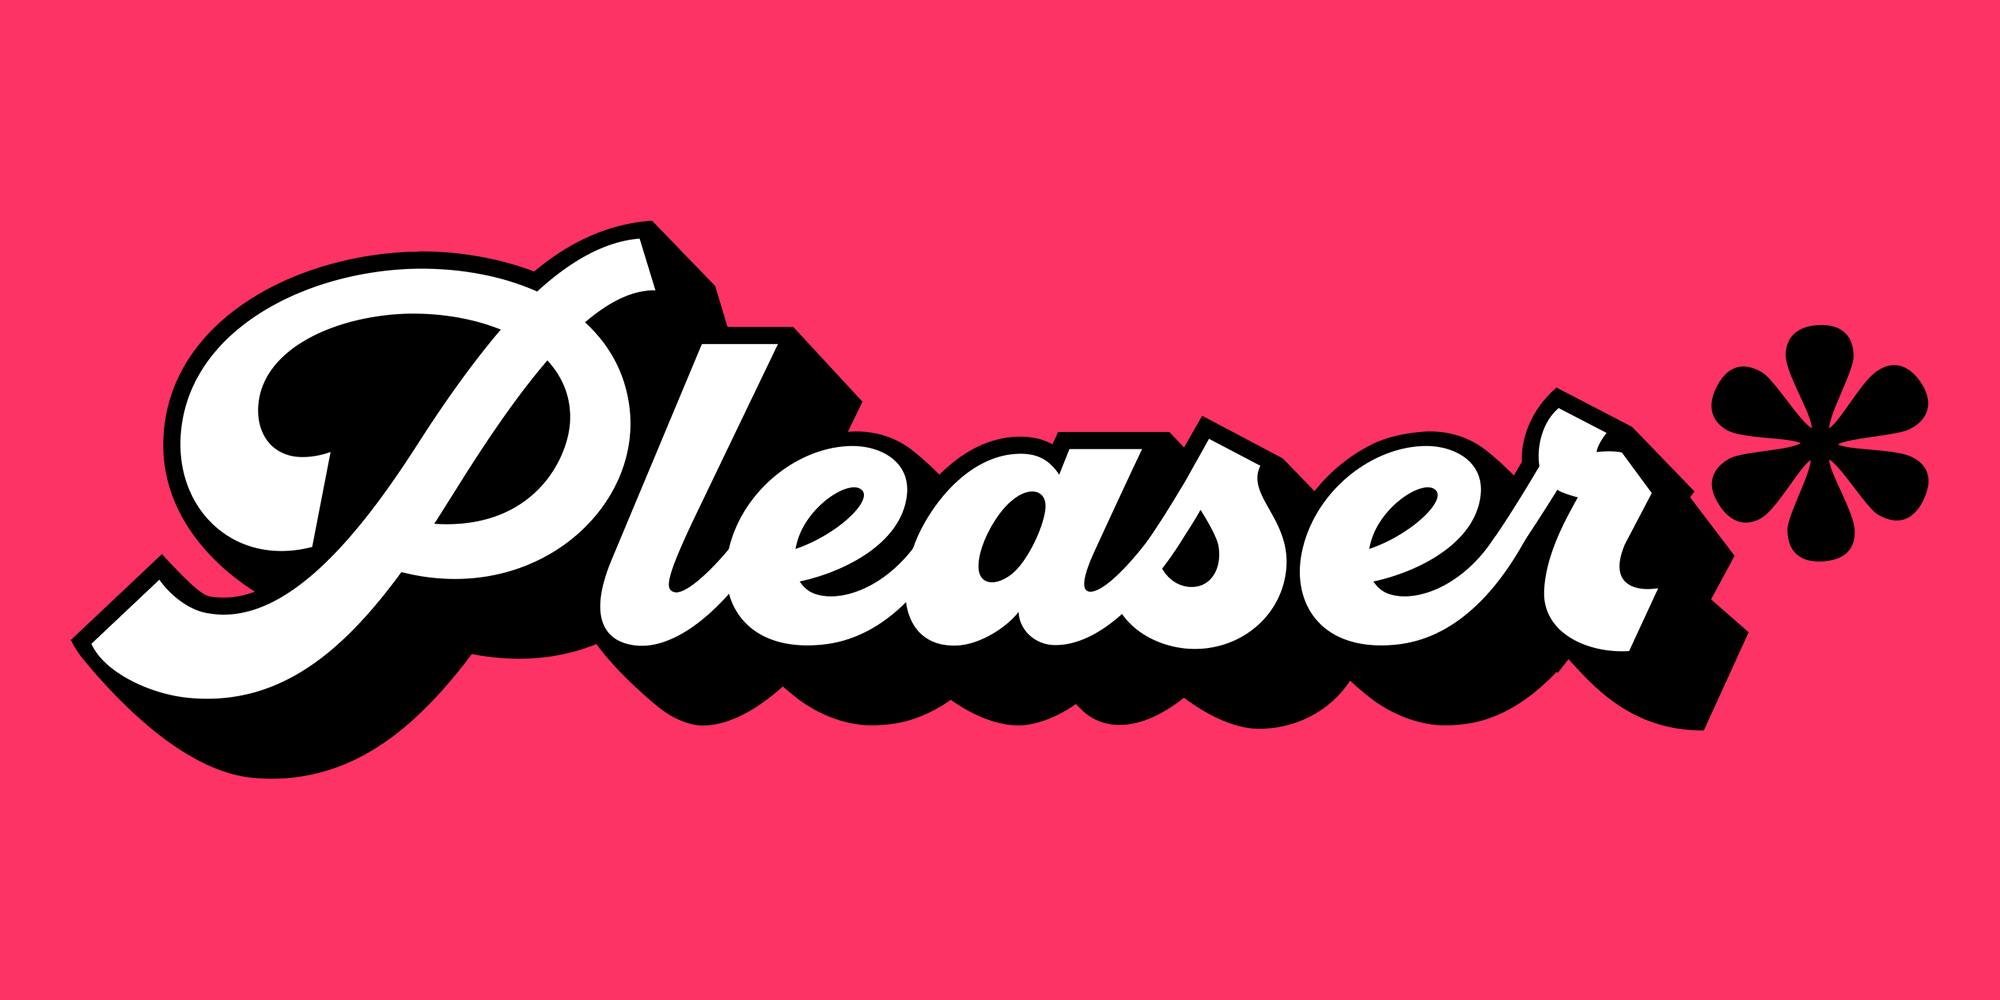 Editor’s Note: Welcome to Pleaser, the Daily Dot’s new sex culture vertical